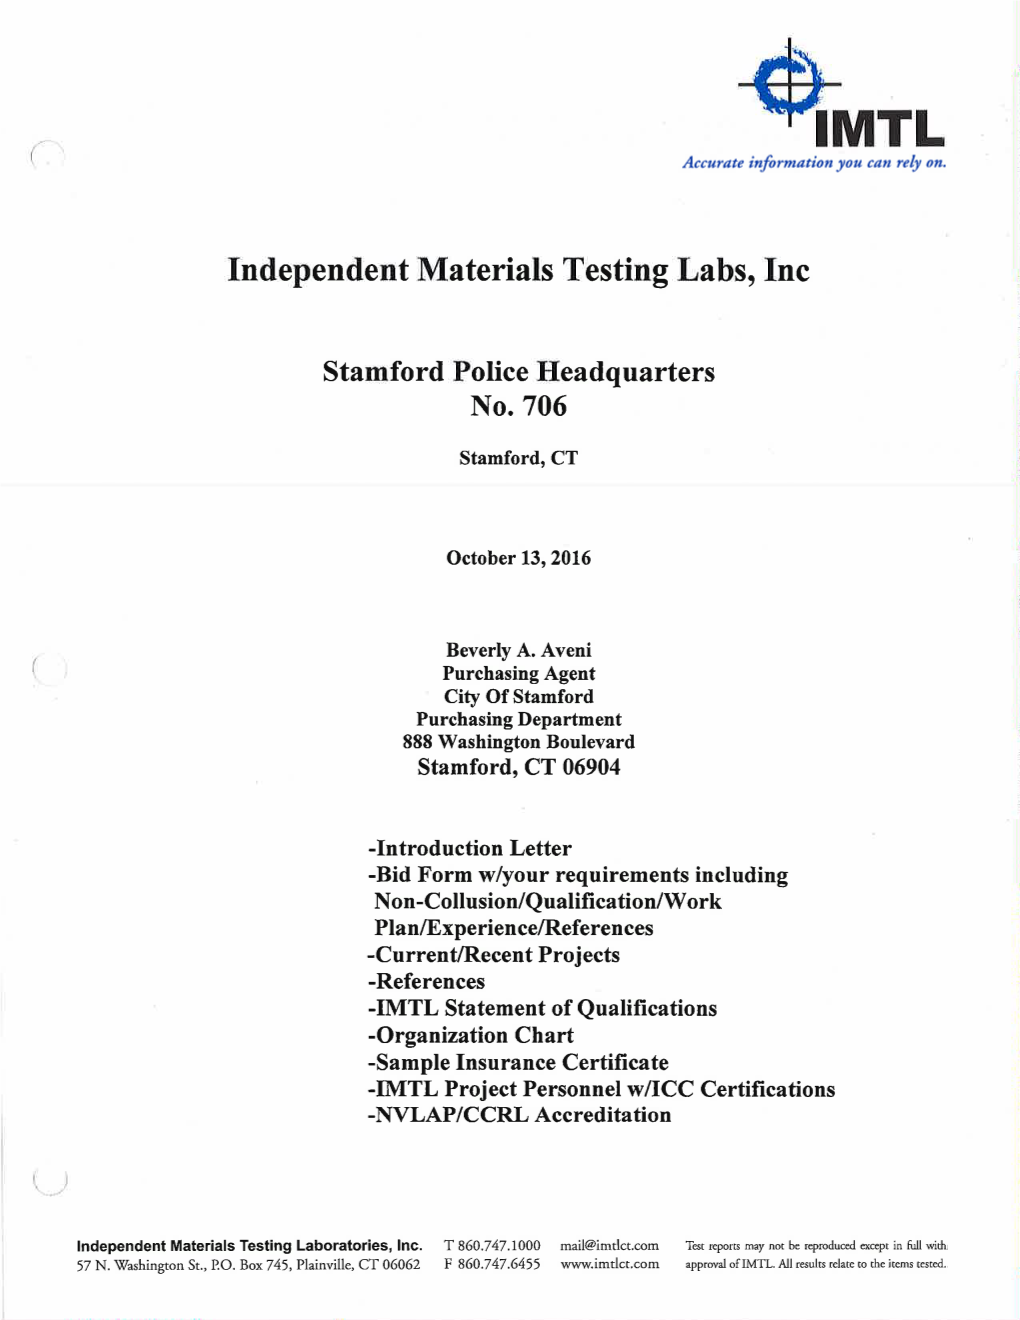 Independent Materials Testing Labs, Inc